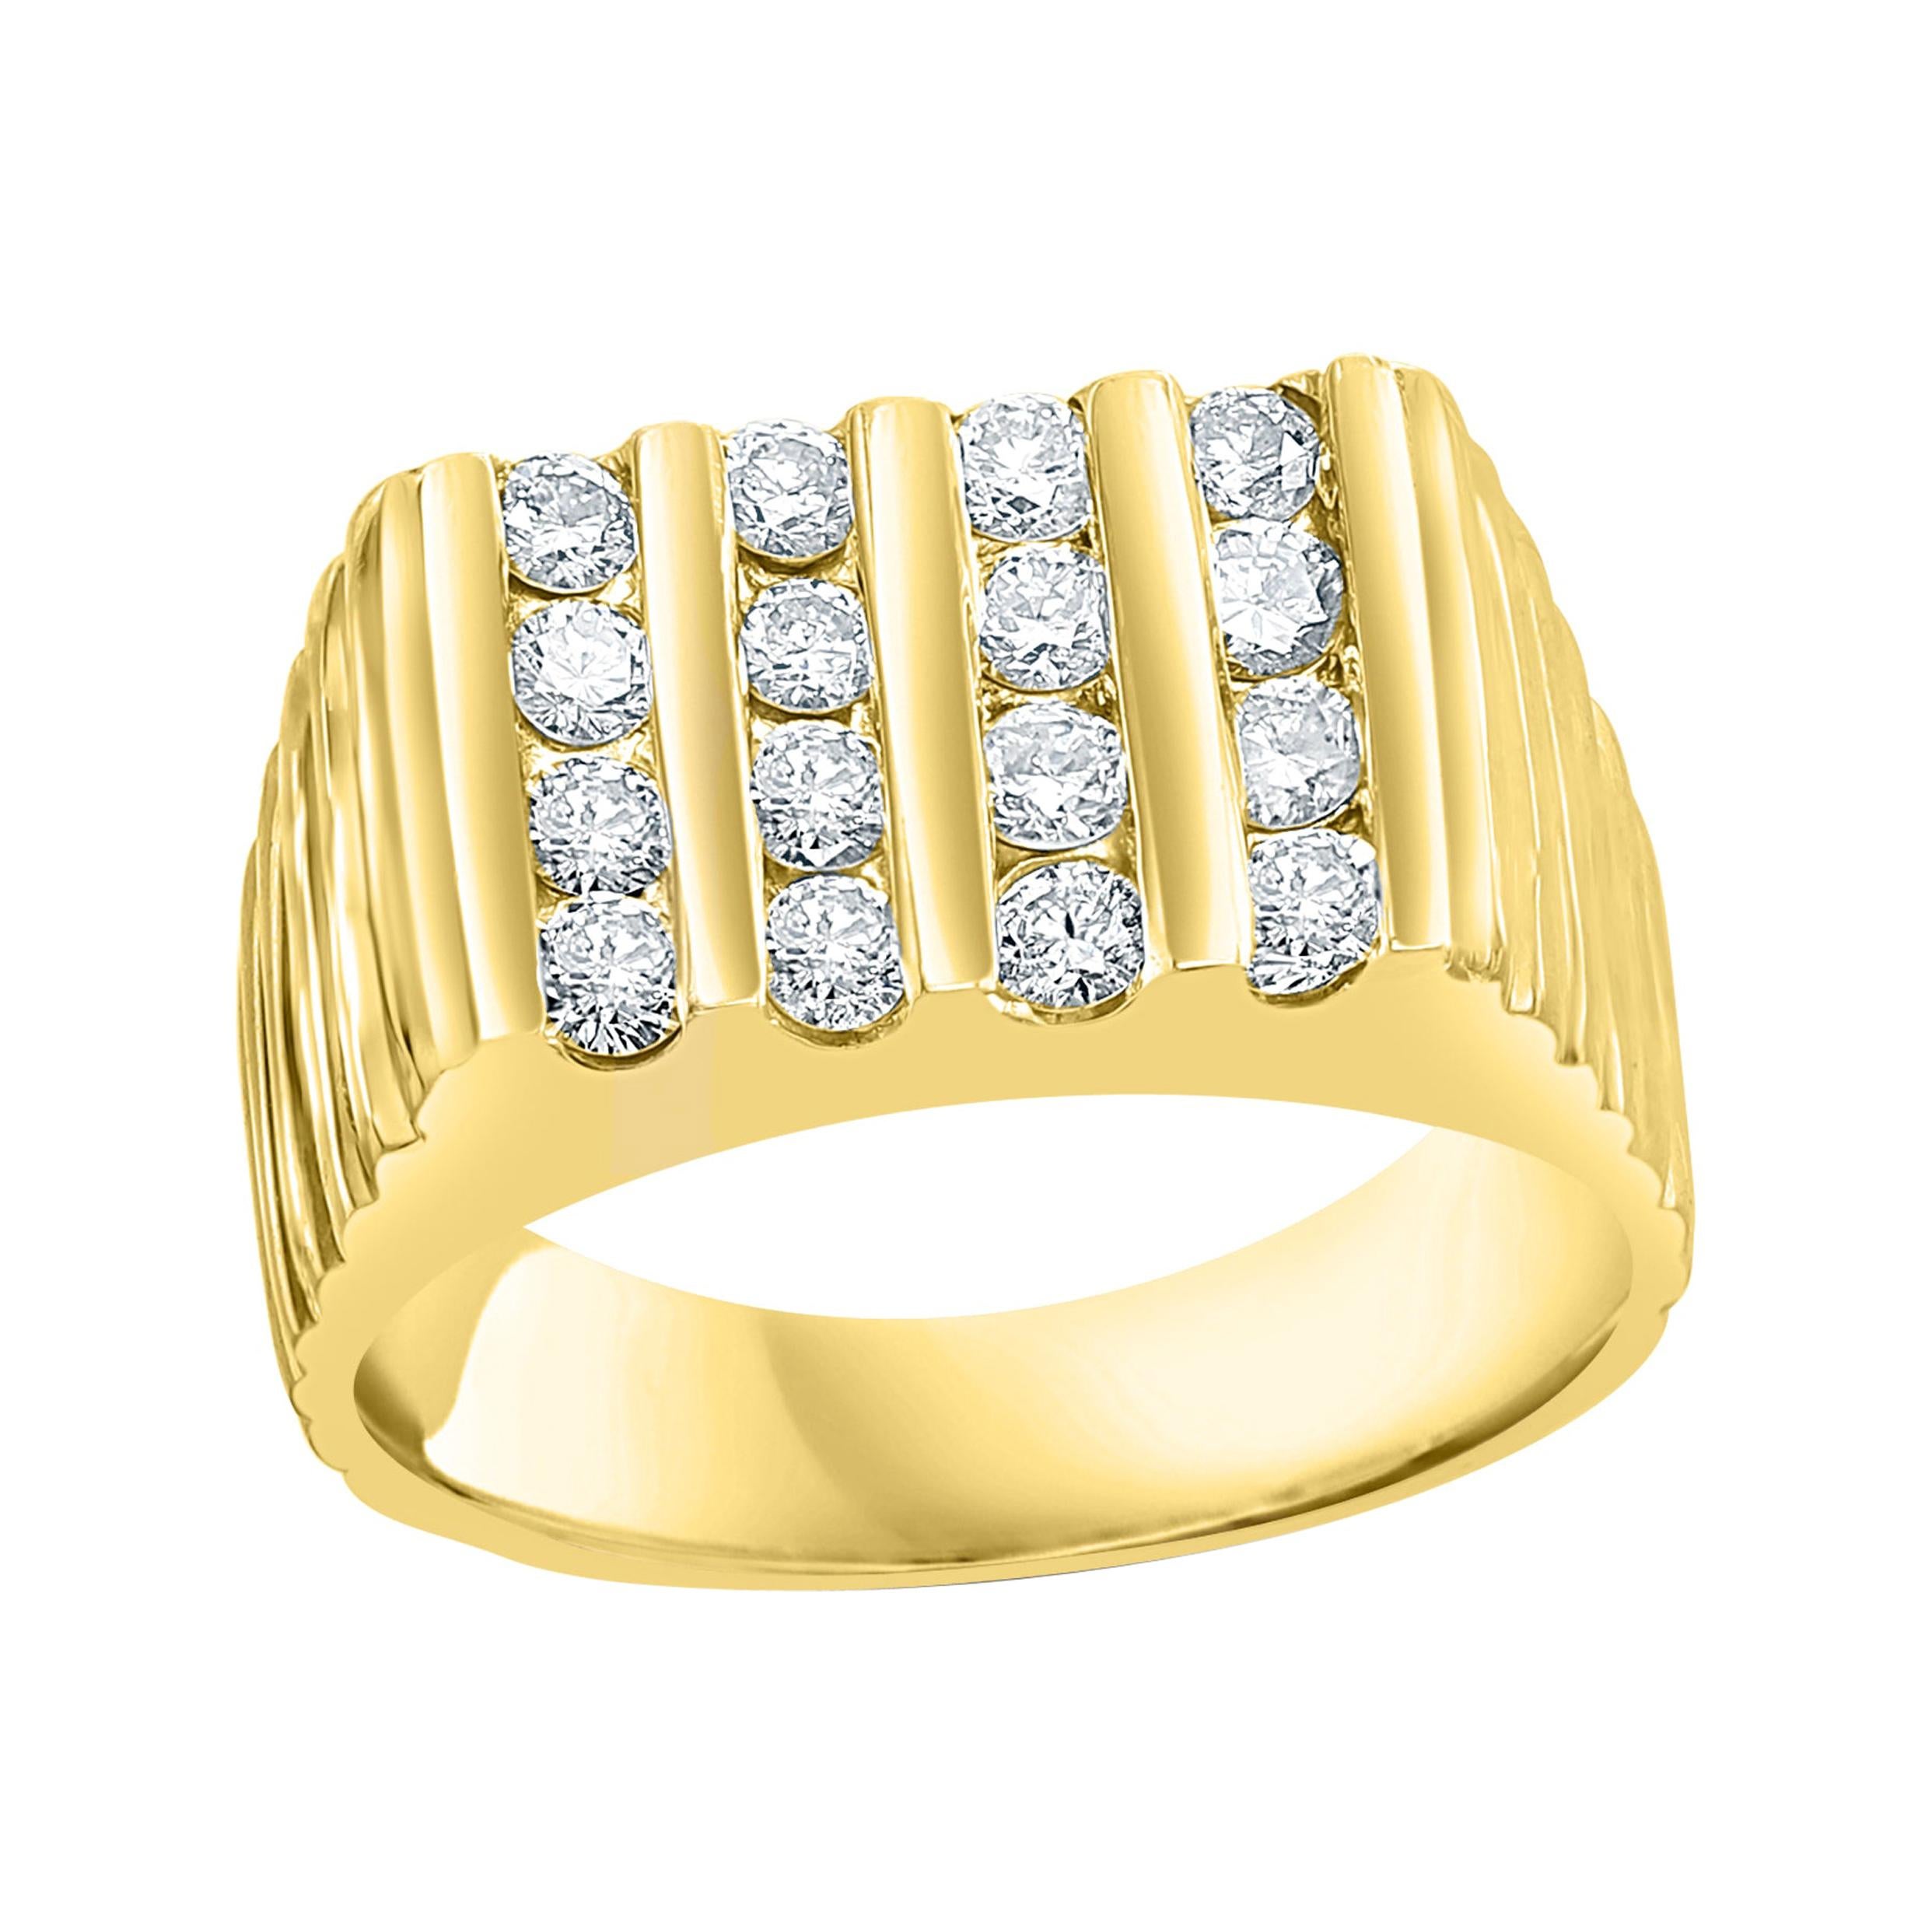 4 Row Unisex Diamond Band Engagement Ring in 14 Karat Yellow Gold For Sale